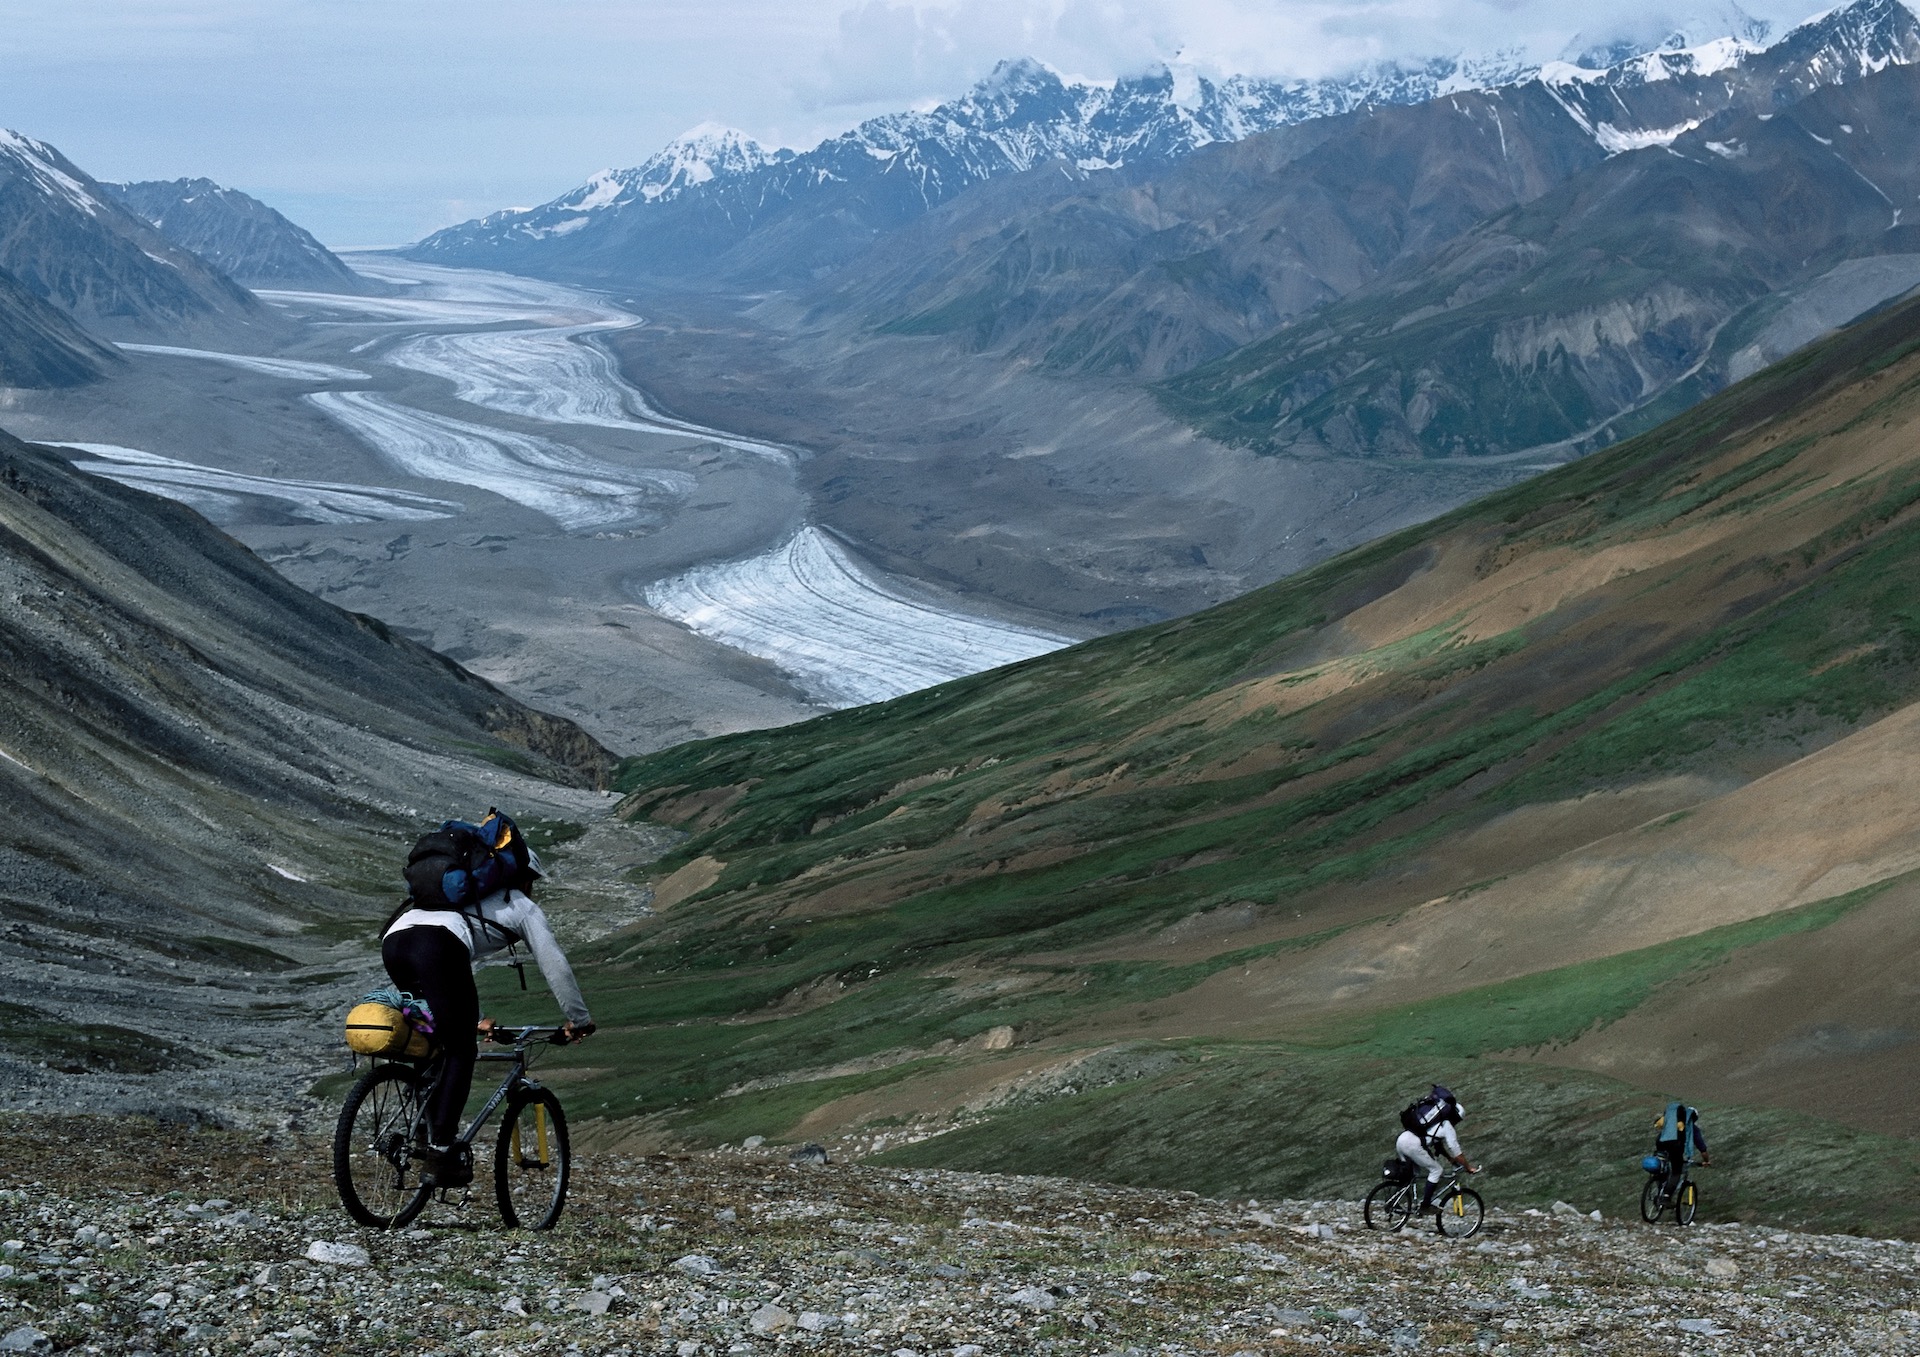 Three mountain bikers ride down a trailless scree slope above a striated glacier flowing through a huge, broad mountain valley.